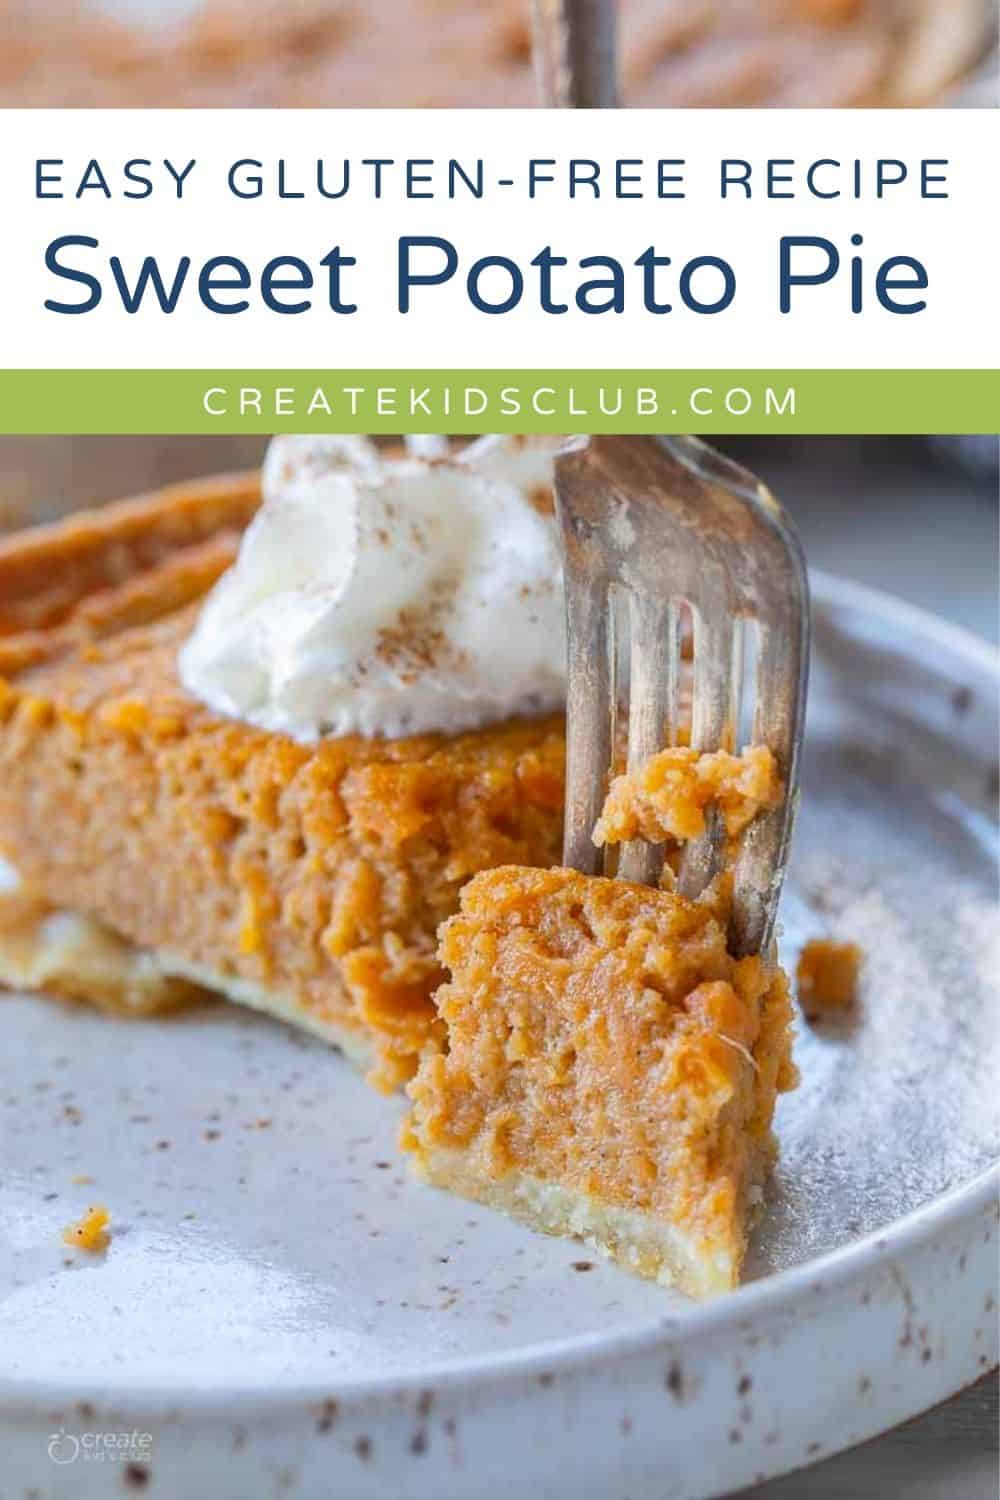 Pin of old fashioned sweet potato pie.